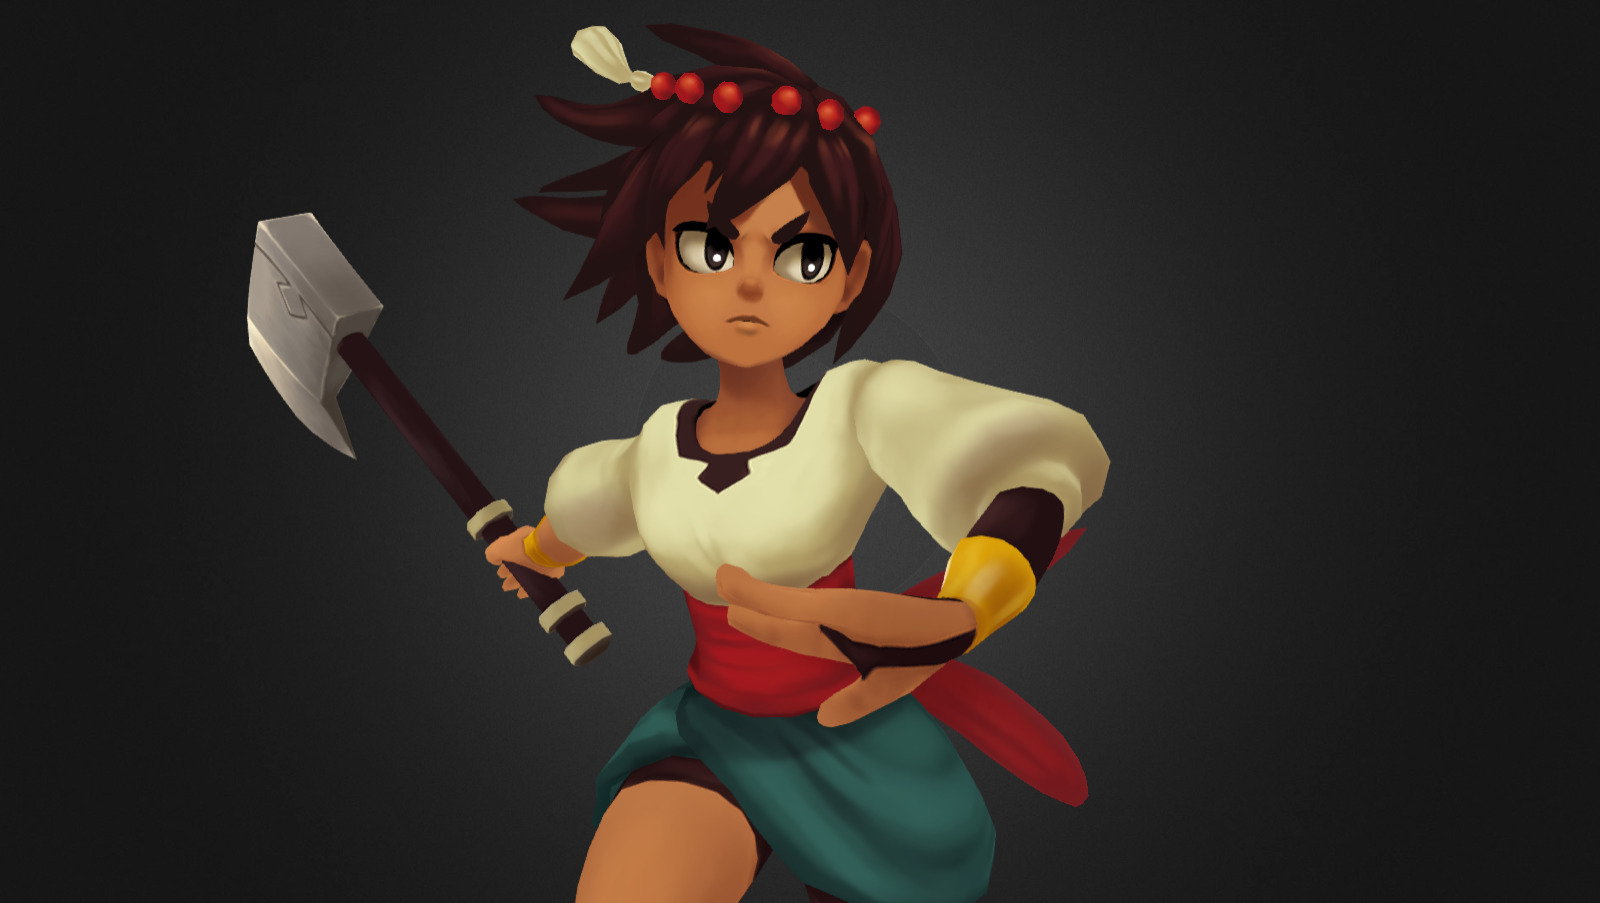 I really wanted to make some fanart of Ajna from Indivisible. Indivisible is an RPG made by Lab Zero, the creators of SKULLGIRLS. It's a game heavily inspired by Valkyrie Profile and Metroid. Check out their demo (which is available for PC and PS4) on their crowdfunding page over here: www.support-indivisible.com - Indivisible Ajna - Fanart - 3D model by Mafubash 3d model